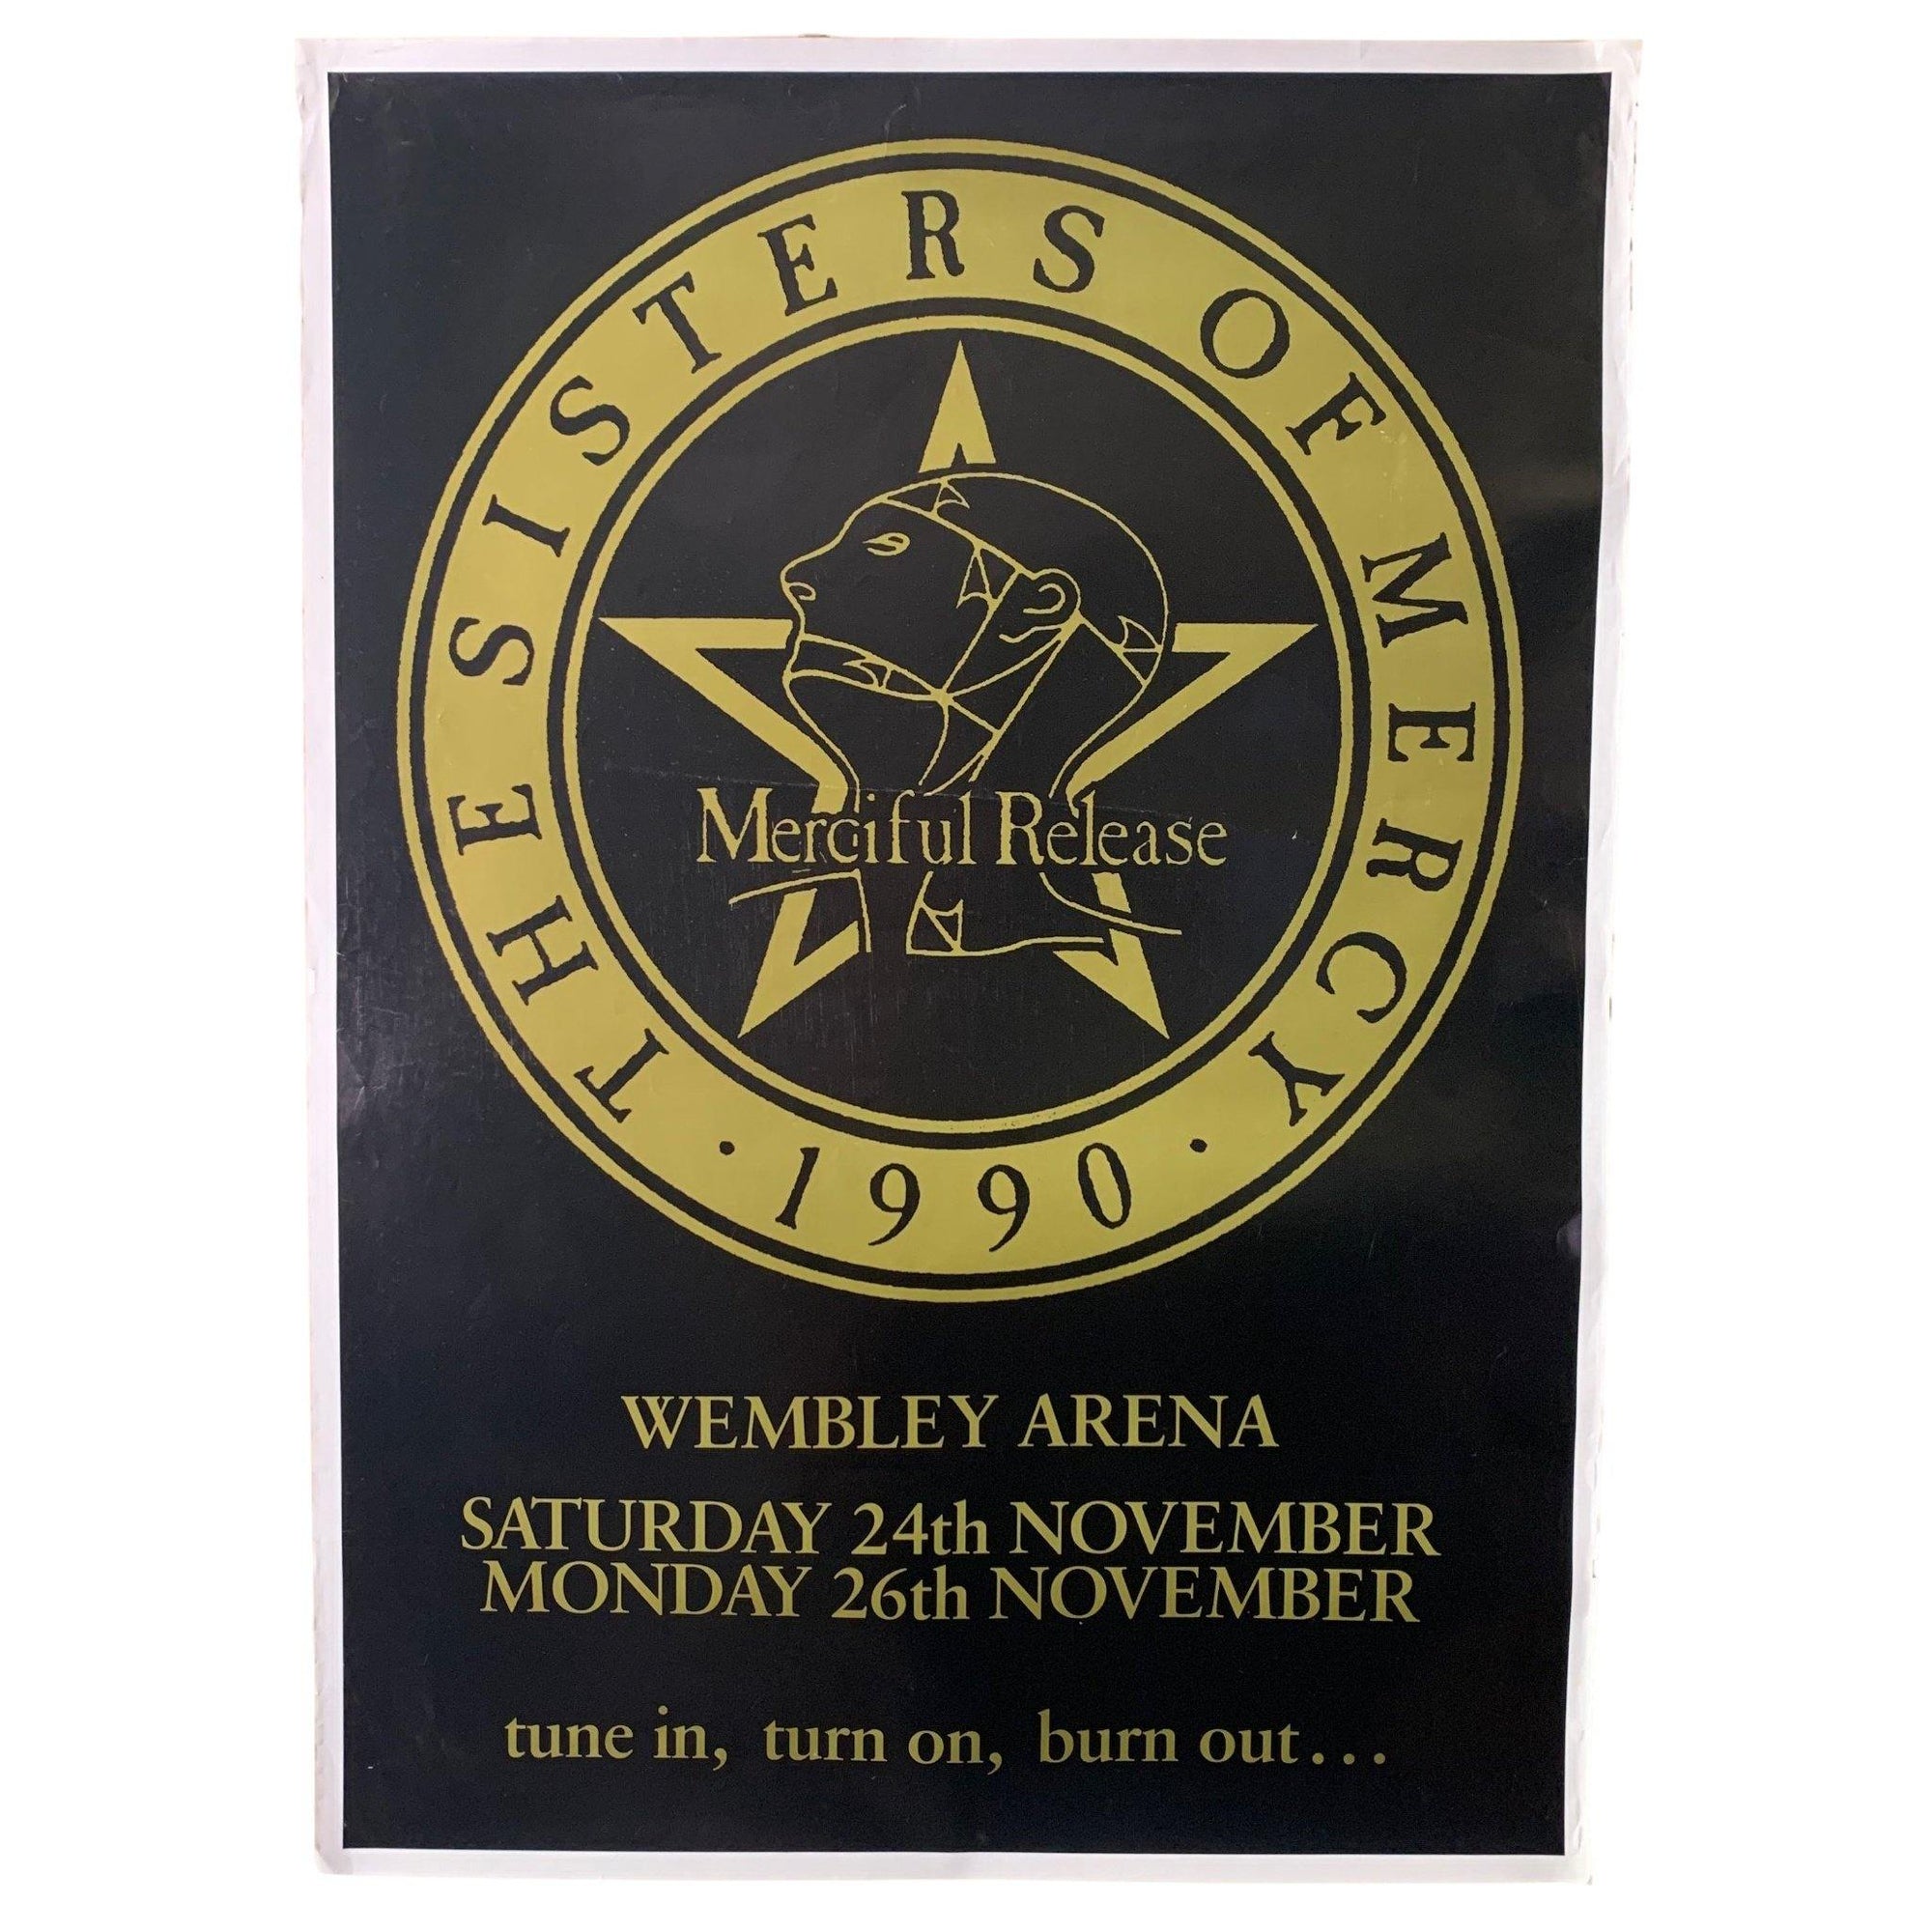 Vintage The Sisters Of Mercy "Merciful Release" Wembley Arena Poster - jointcustodydc